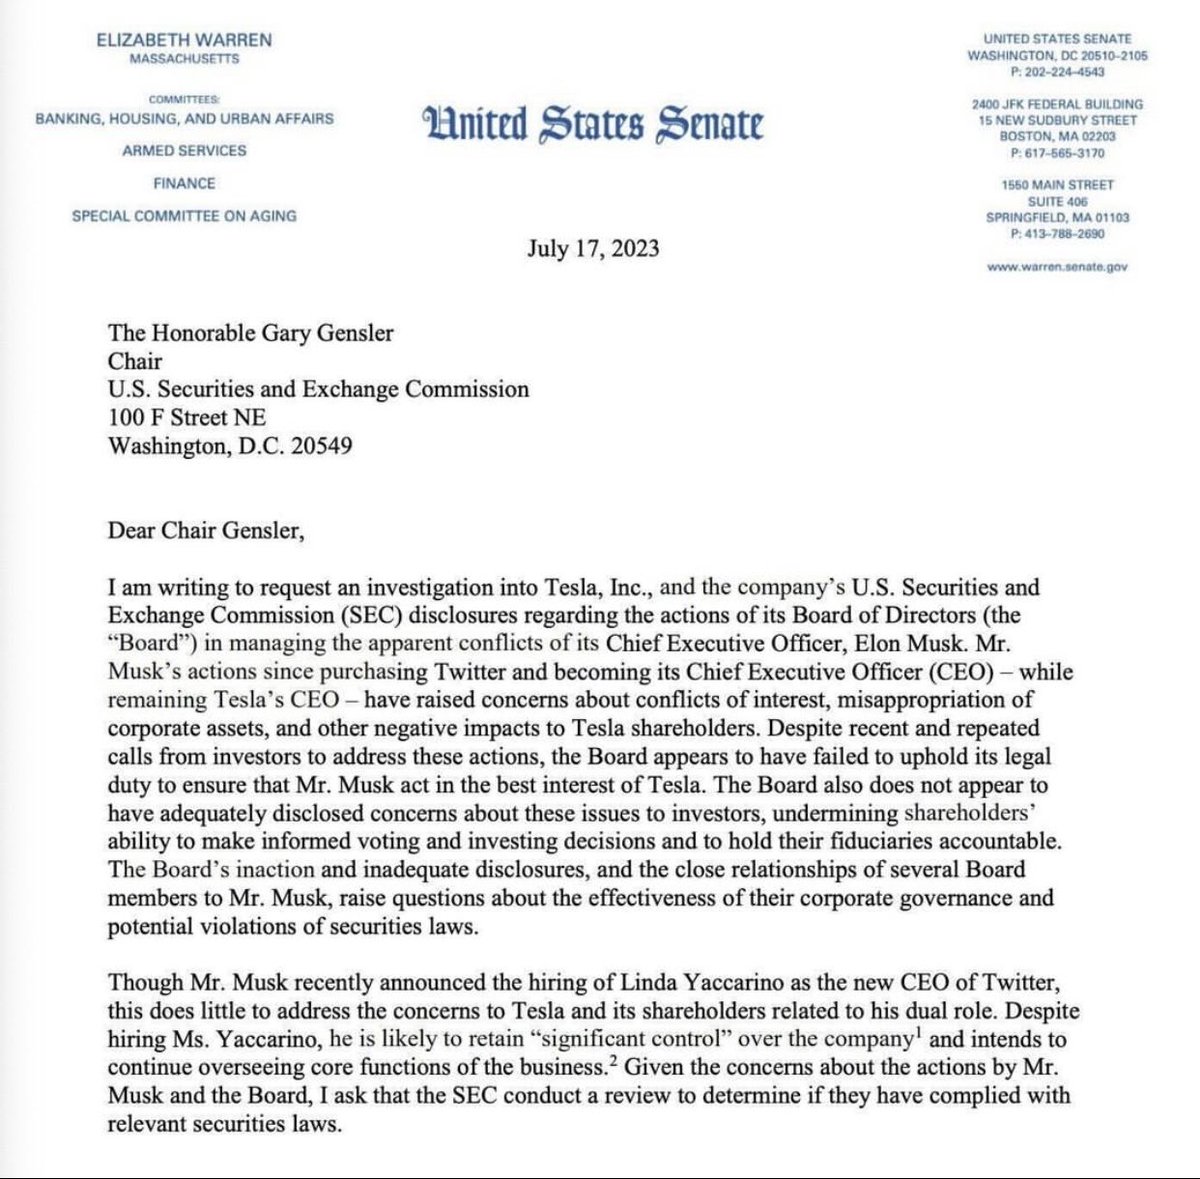 United States Senator Elizabeth Warren has asked the Securities and Exchange Commission ( #SEC  ) to investigate #Tesla  , which is led by #ElonMusk 

The reason behind this request is Senator Warren's concern about potential misappropriation of assets and conflicts of interest… https://t.co/hyJKtHRvEU https://t.co/msTs0NSXl1